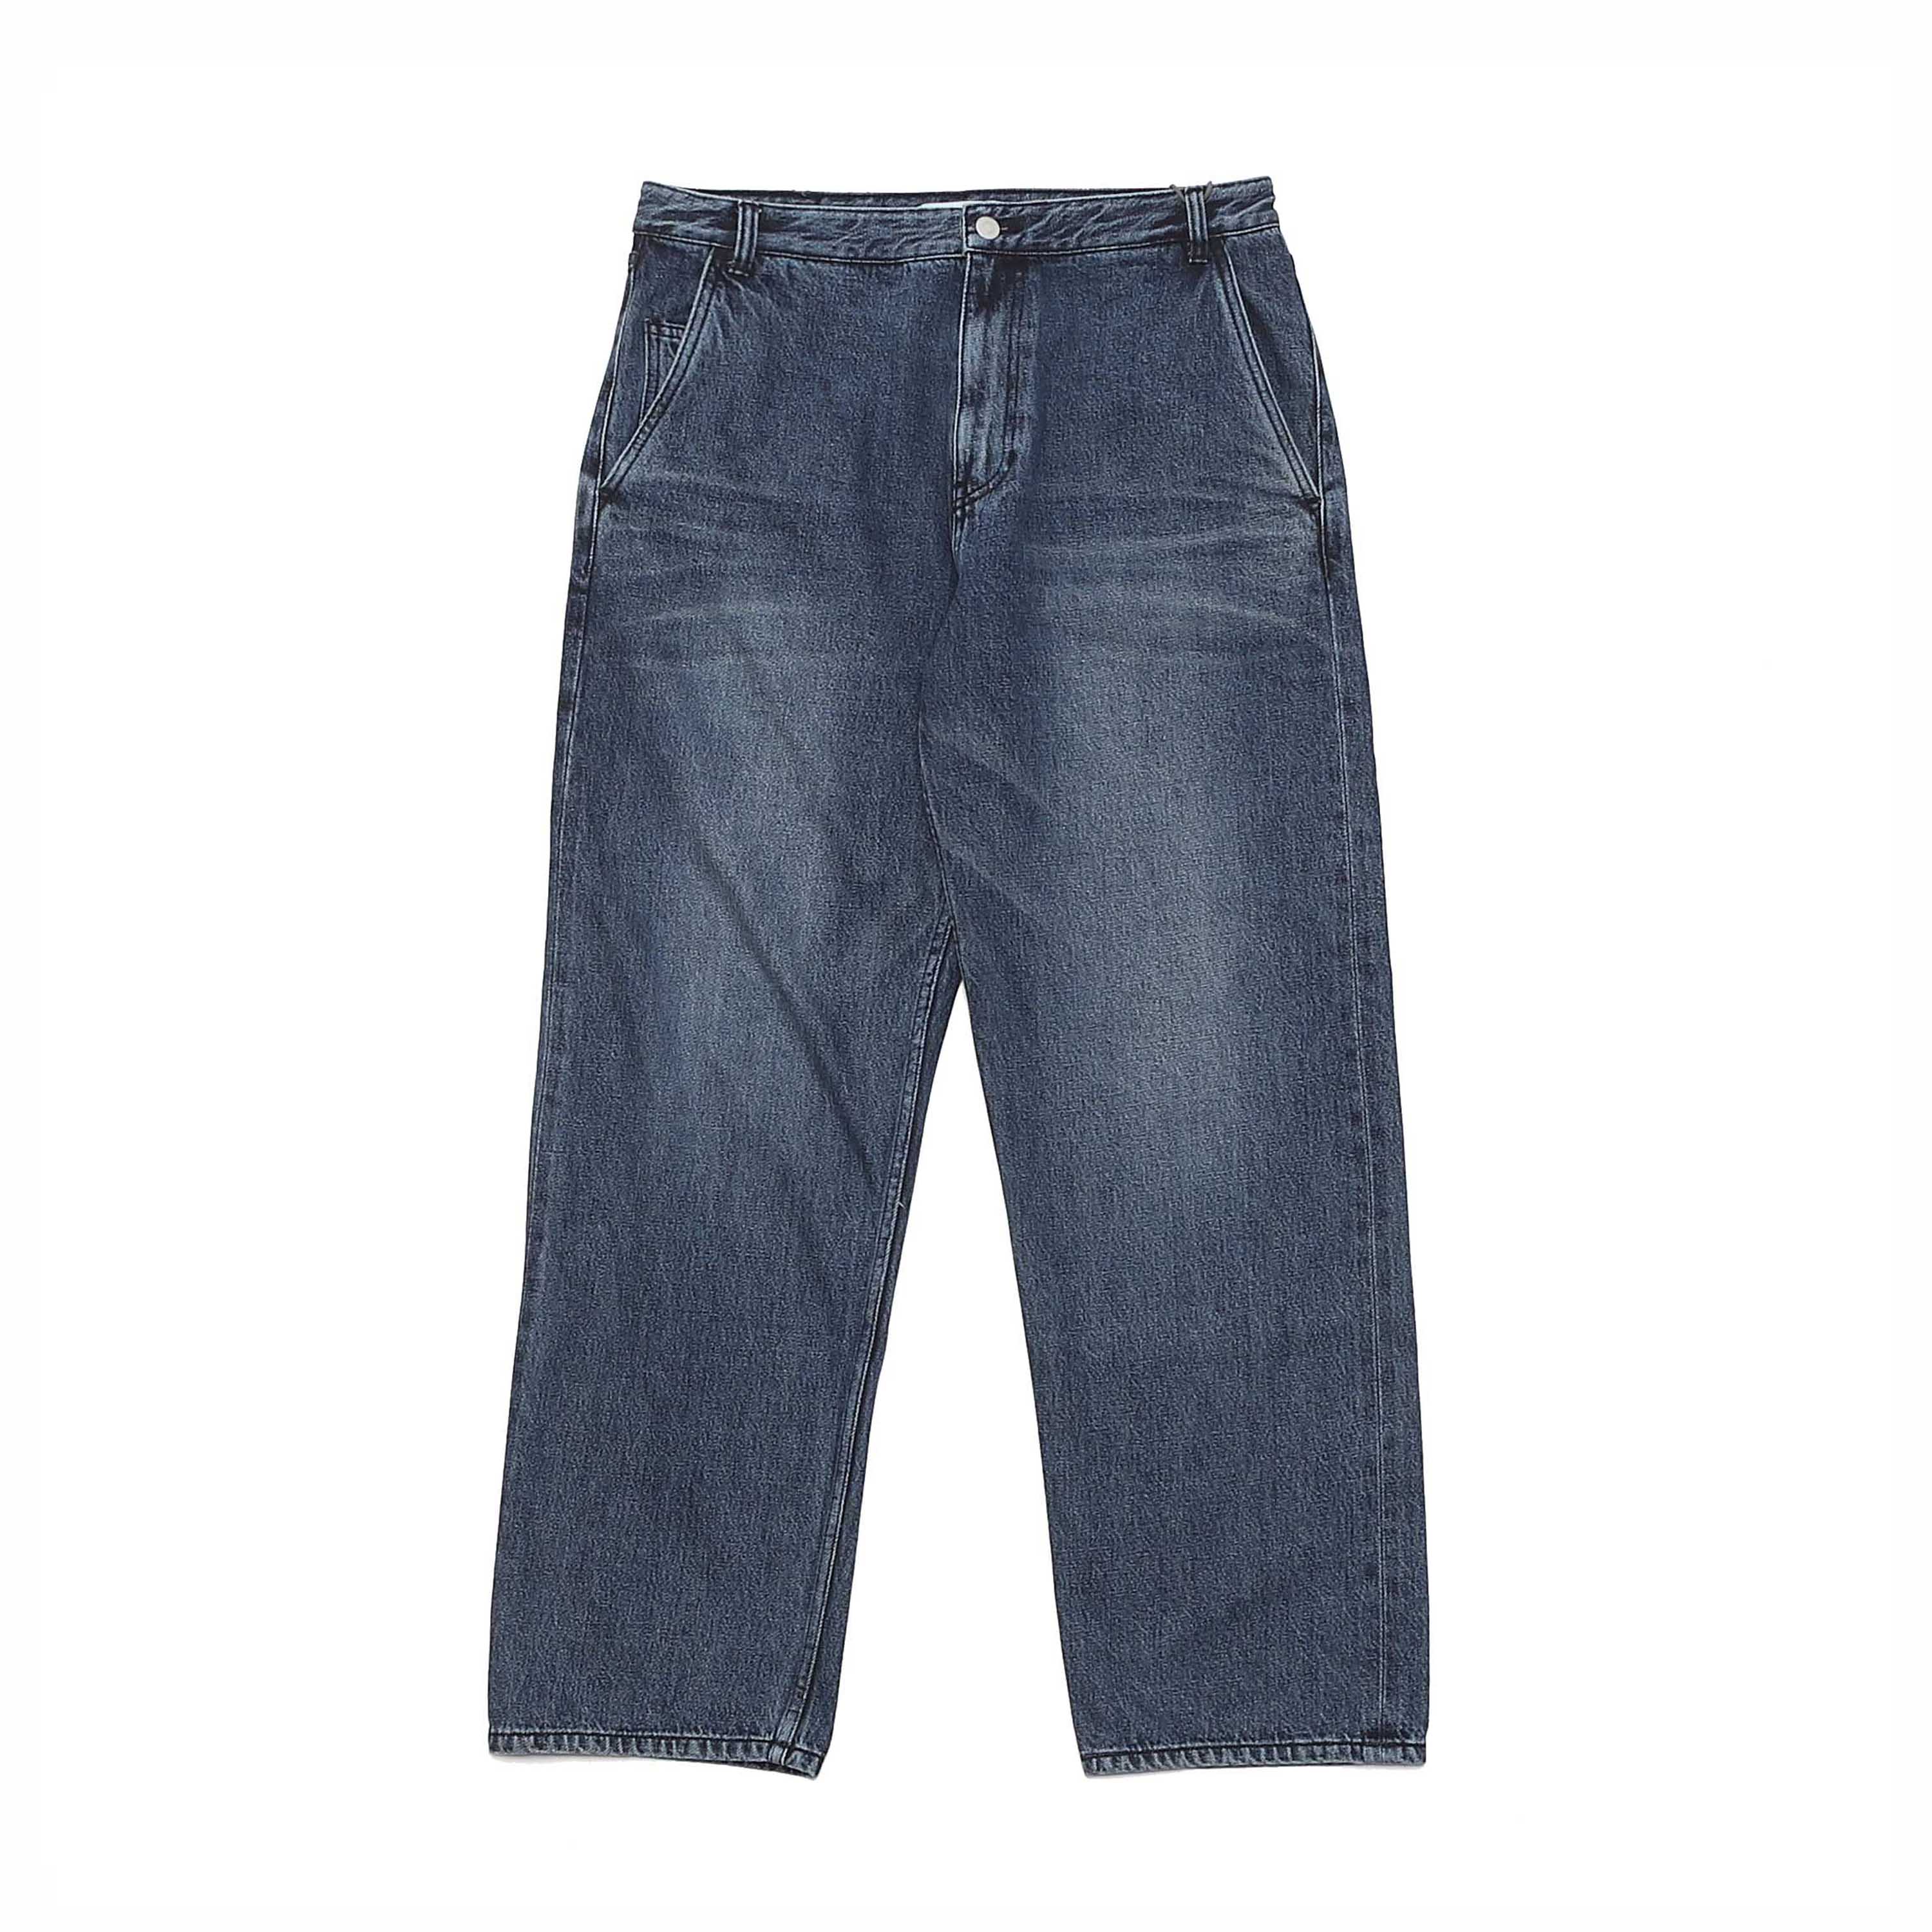 ORGANIC COTTON RELAXED DENIM PANTS - WASHED BLUE